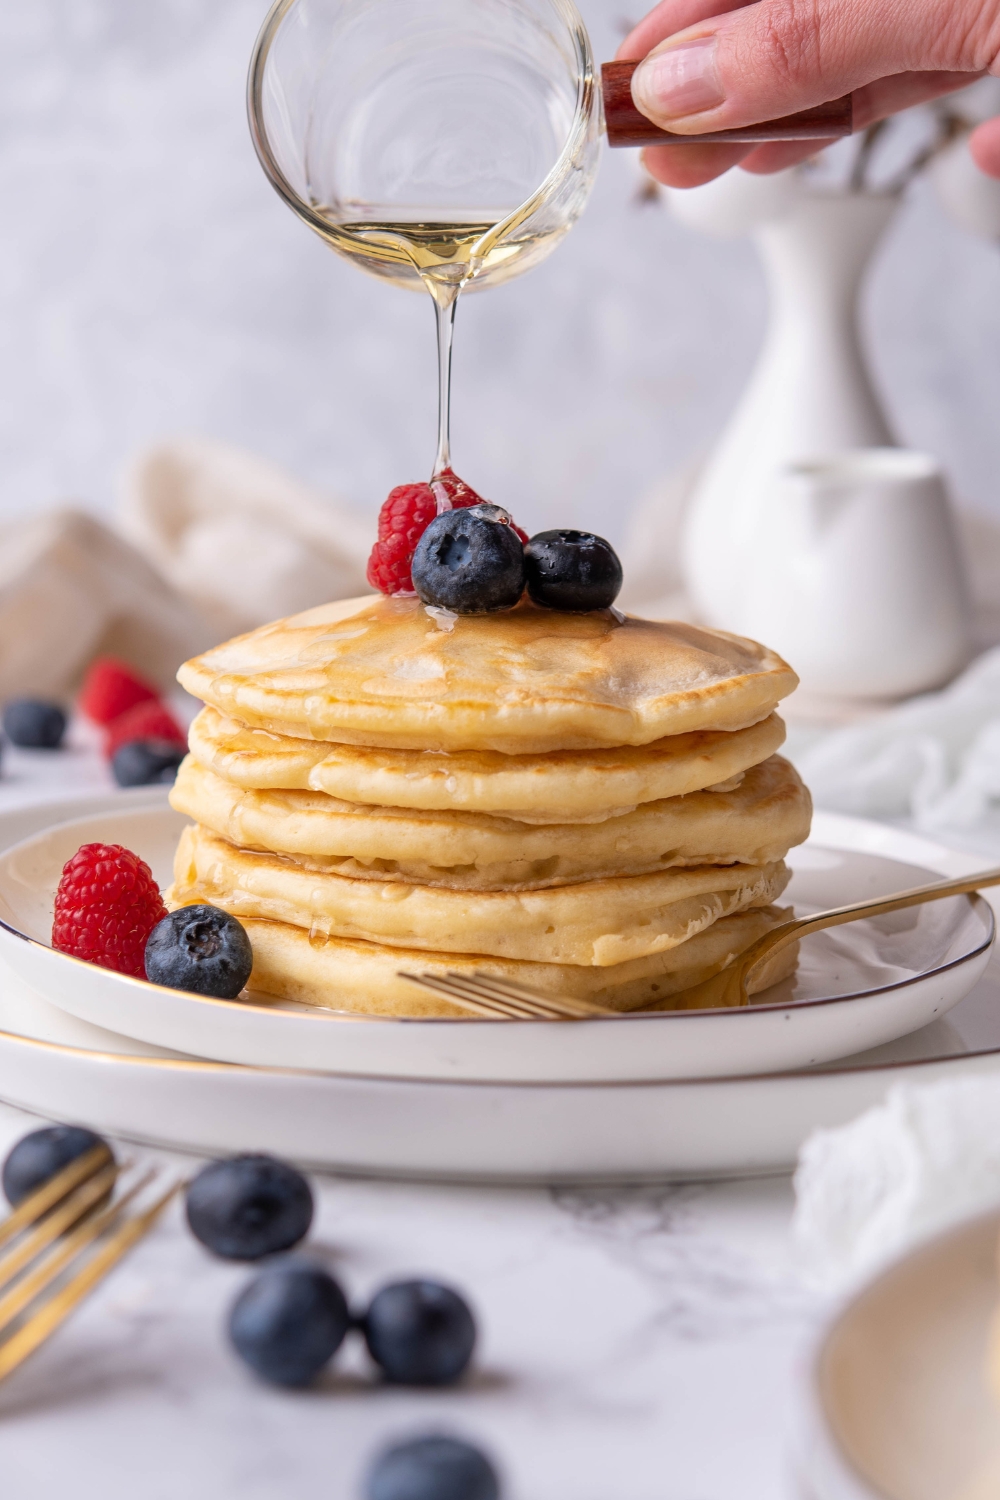 A stack of pancakes being drizzled with maple syrup and topped with fresh berries on a plate.